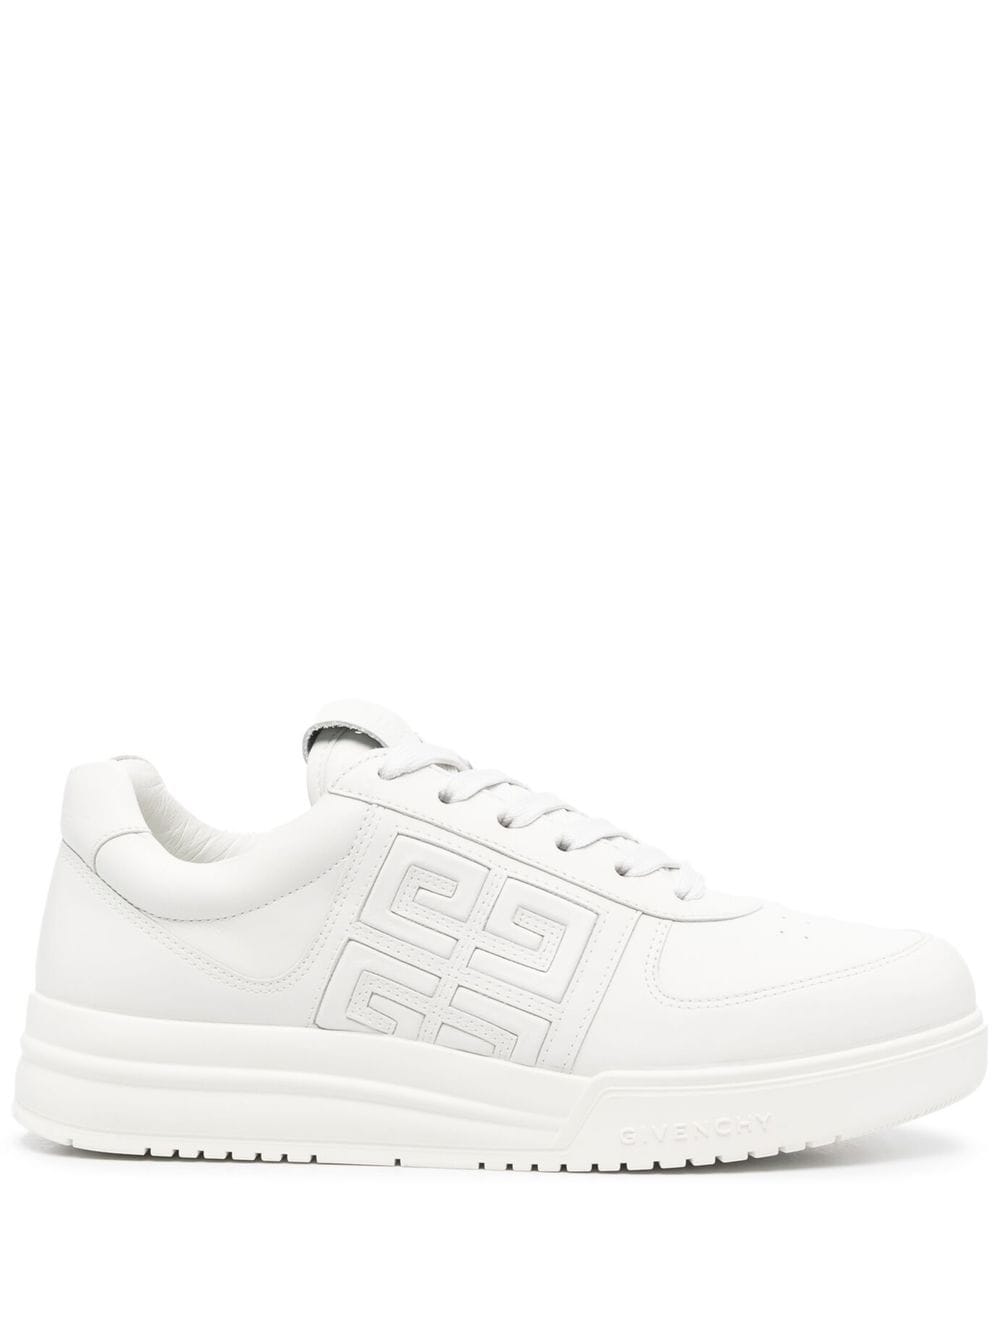 Shop Givenchy White G4 Leather Low-top Sneakers